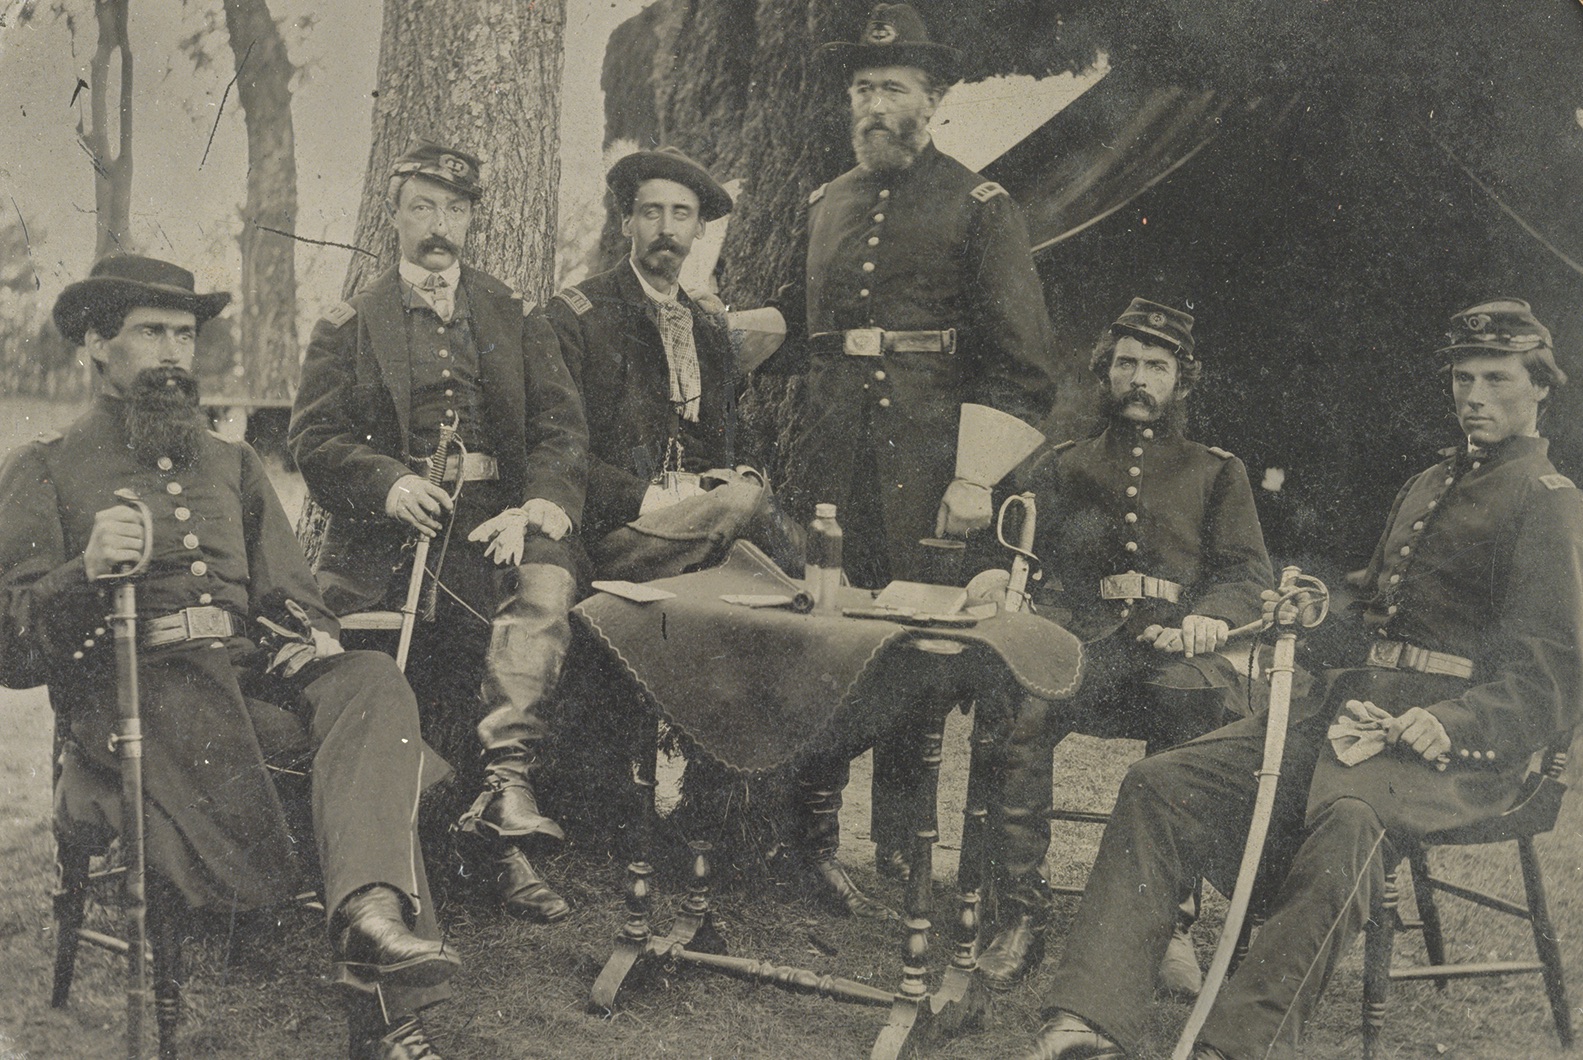 Staff officers who served under Brig. Gen. Samuel W. Crawford during his command of the Reserves. (Library of Congress)